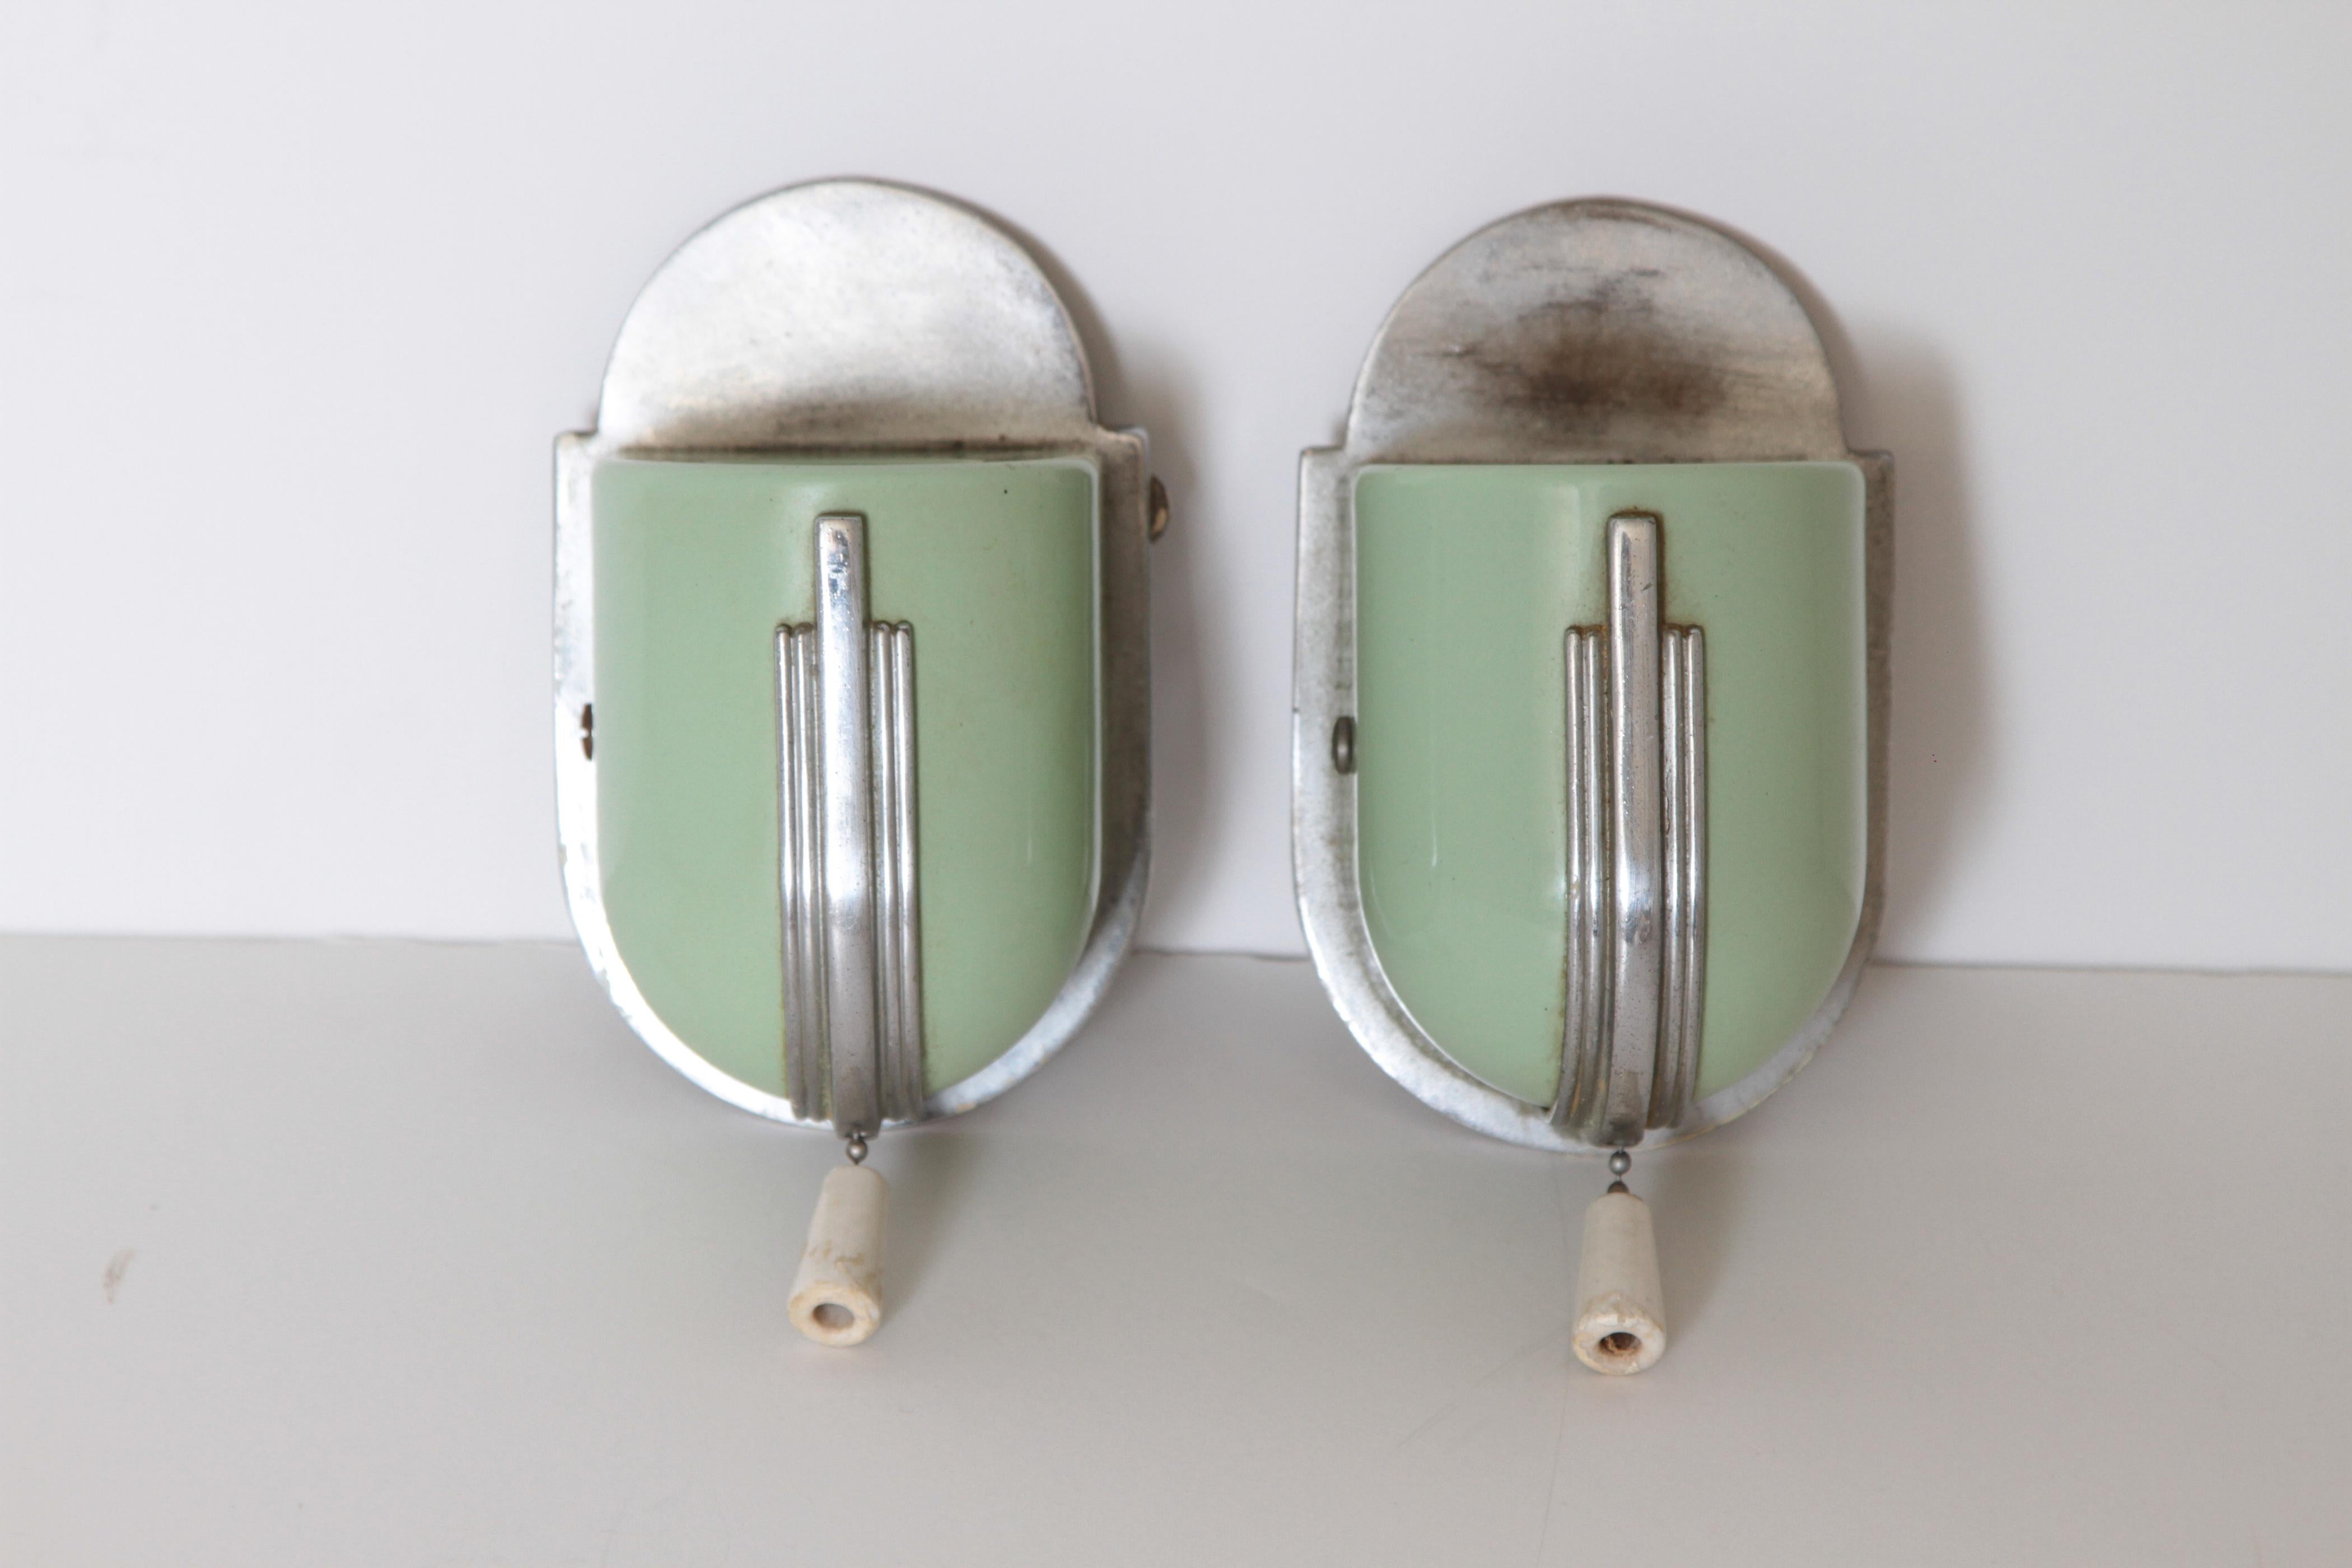 Machine Age Art Deco streamline wall fixtures bathroom sconces

1930s vintage all-metal construction; chromed cast-metal mount-plate, mint-green enameled metal body, with chromed speed-stripe adornment and original ivory colored ceramic pull-chain